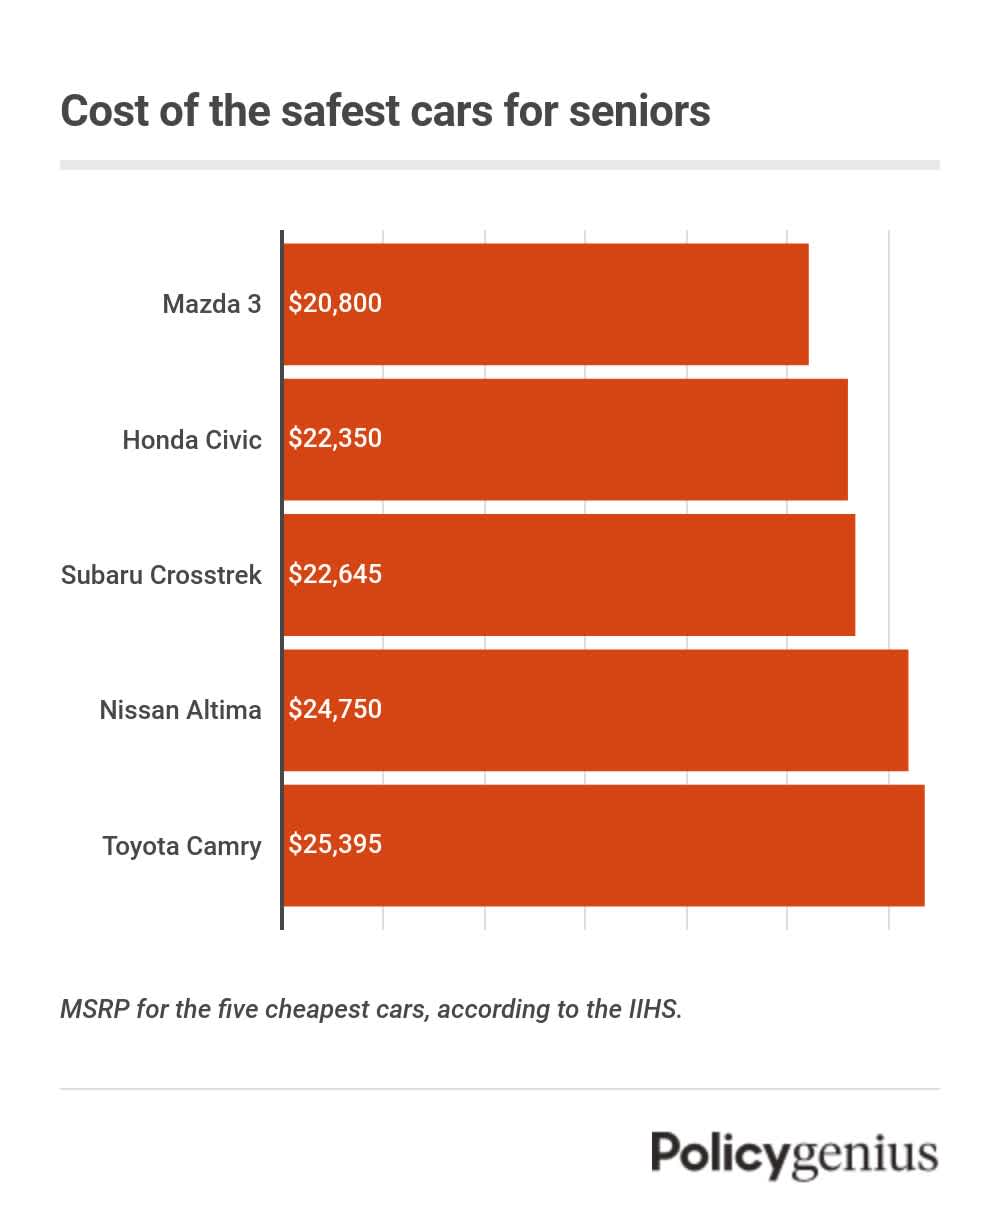 A bar graph showing the cost of the best, safest, and cheapest cars for seniors.